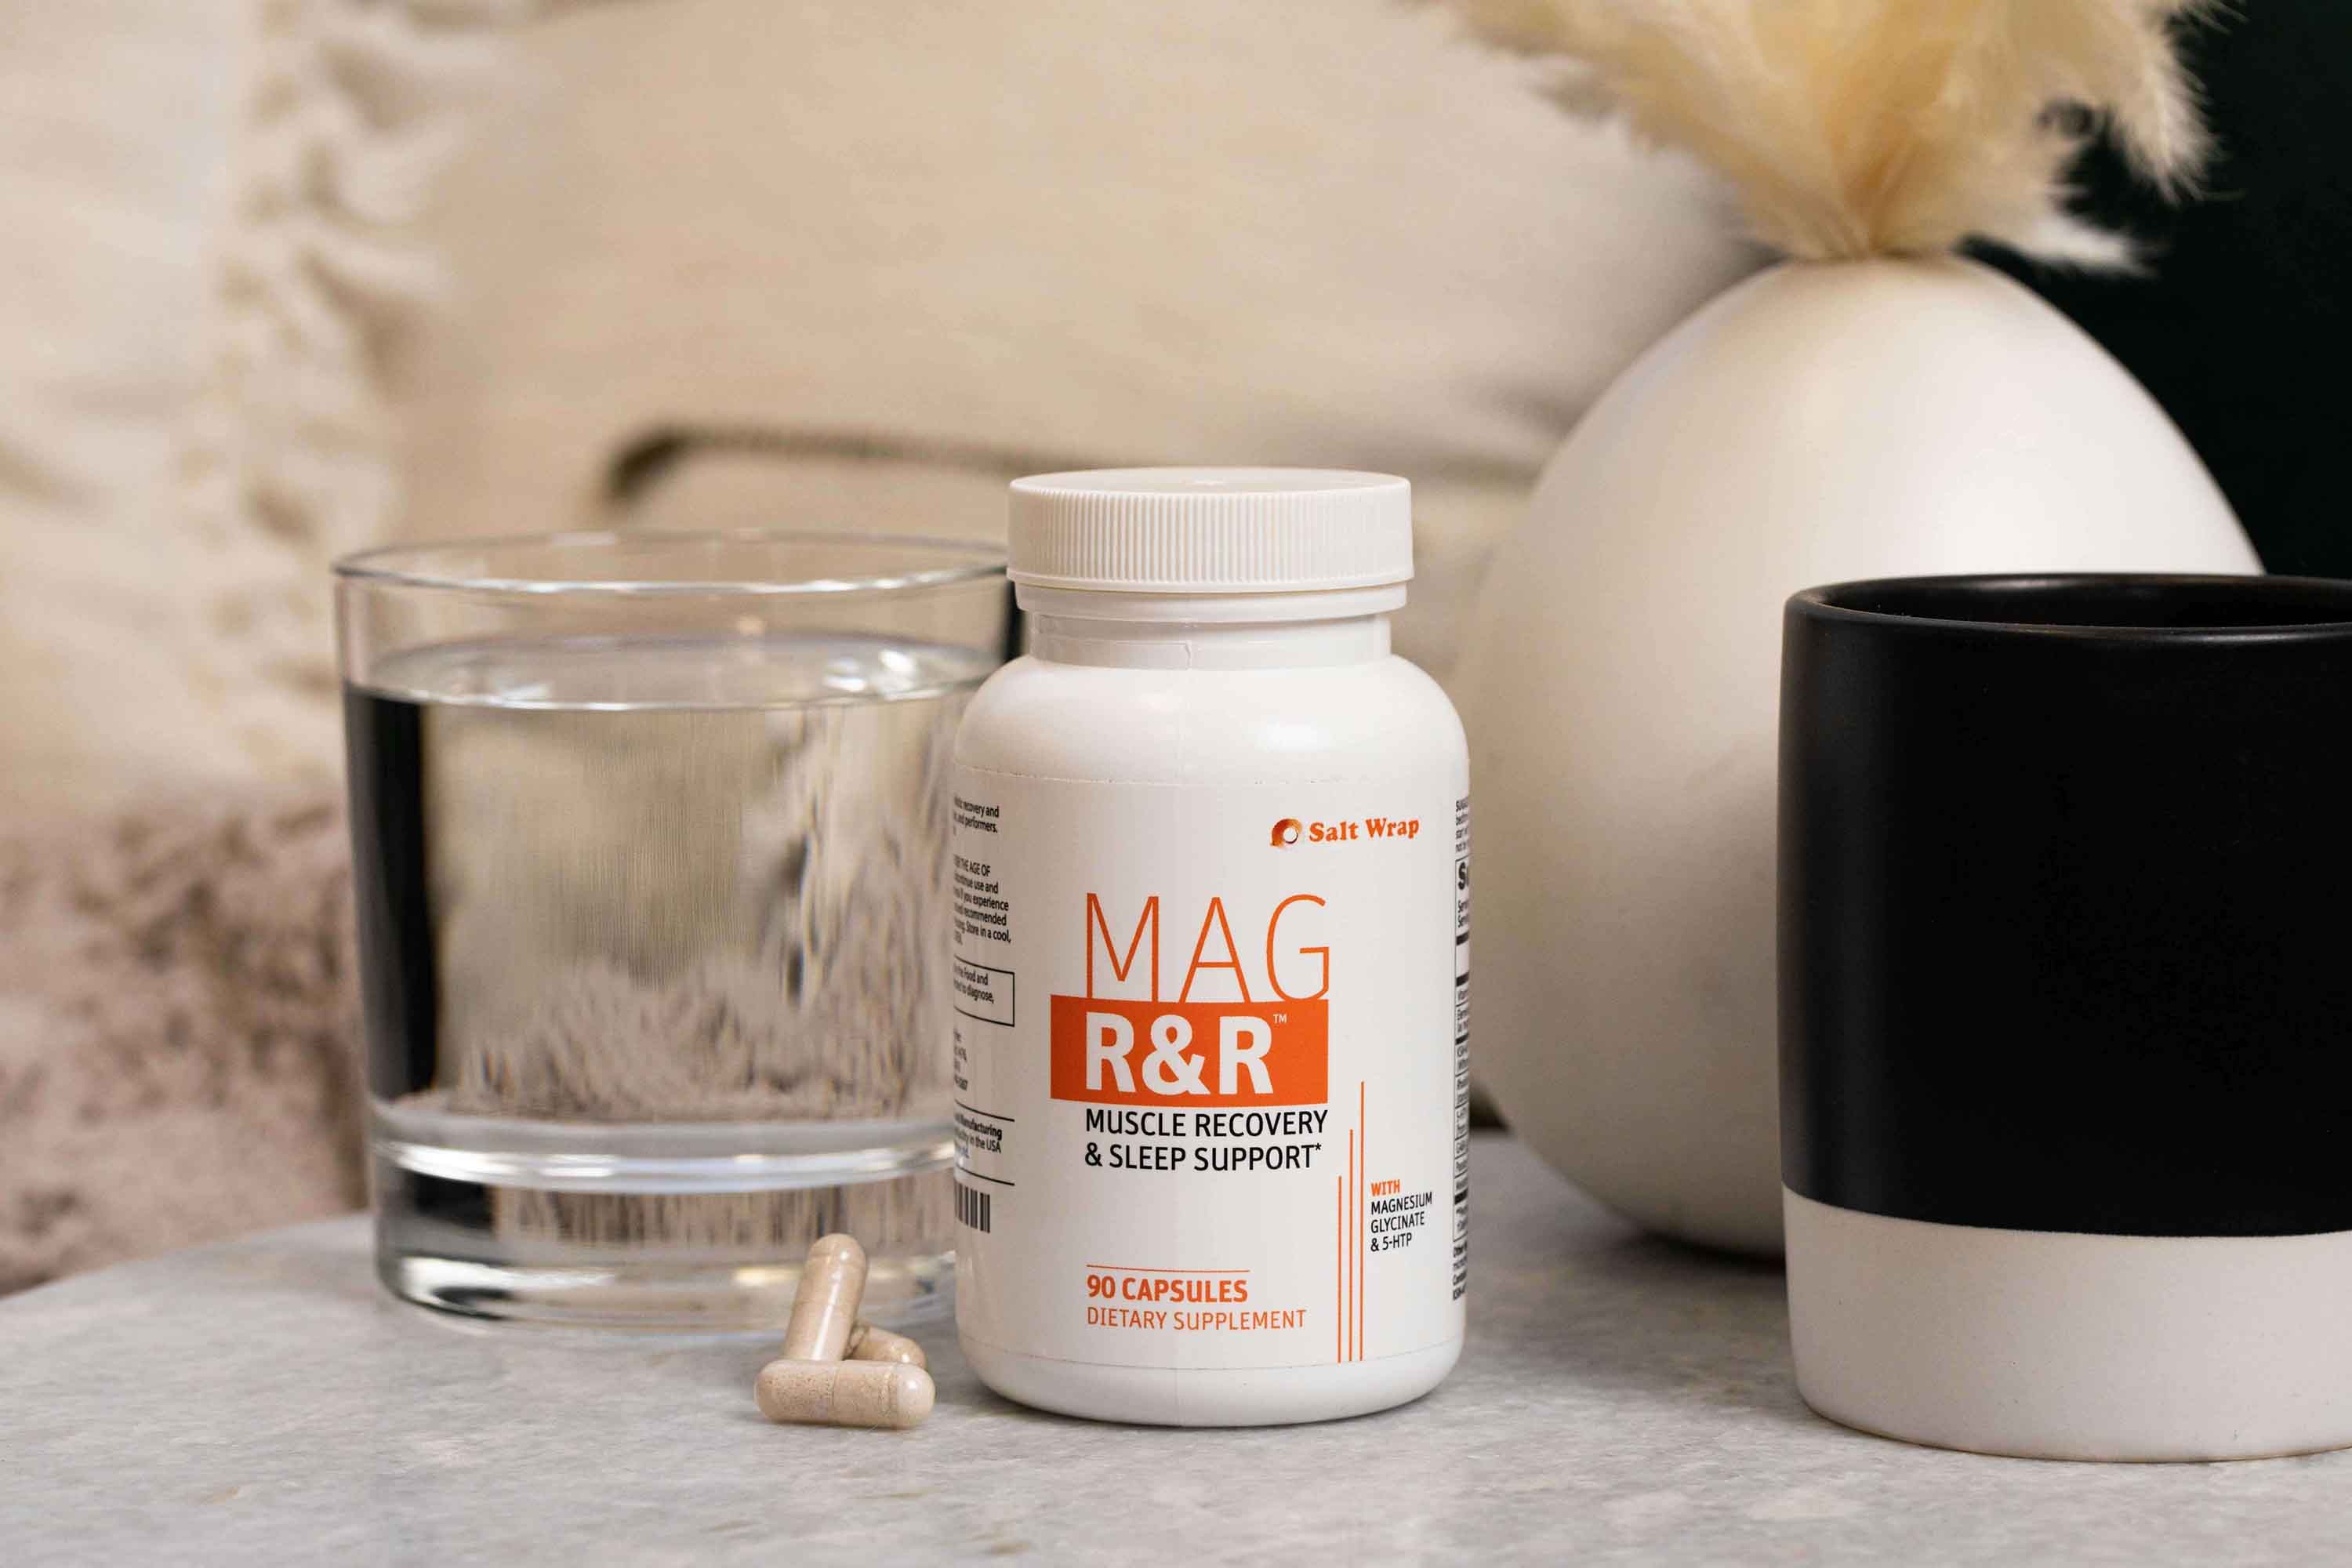 Mag R&R™ is designed to help relax your body (and mind) before bed so that you can sleep through the night – without nighttime leg cramps that can make it impossible to get good rest.